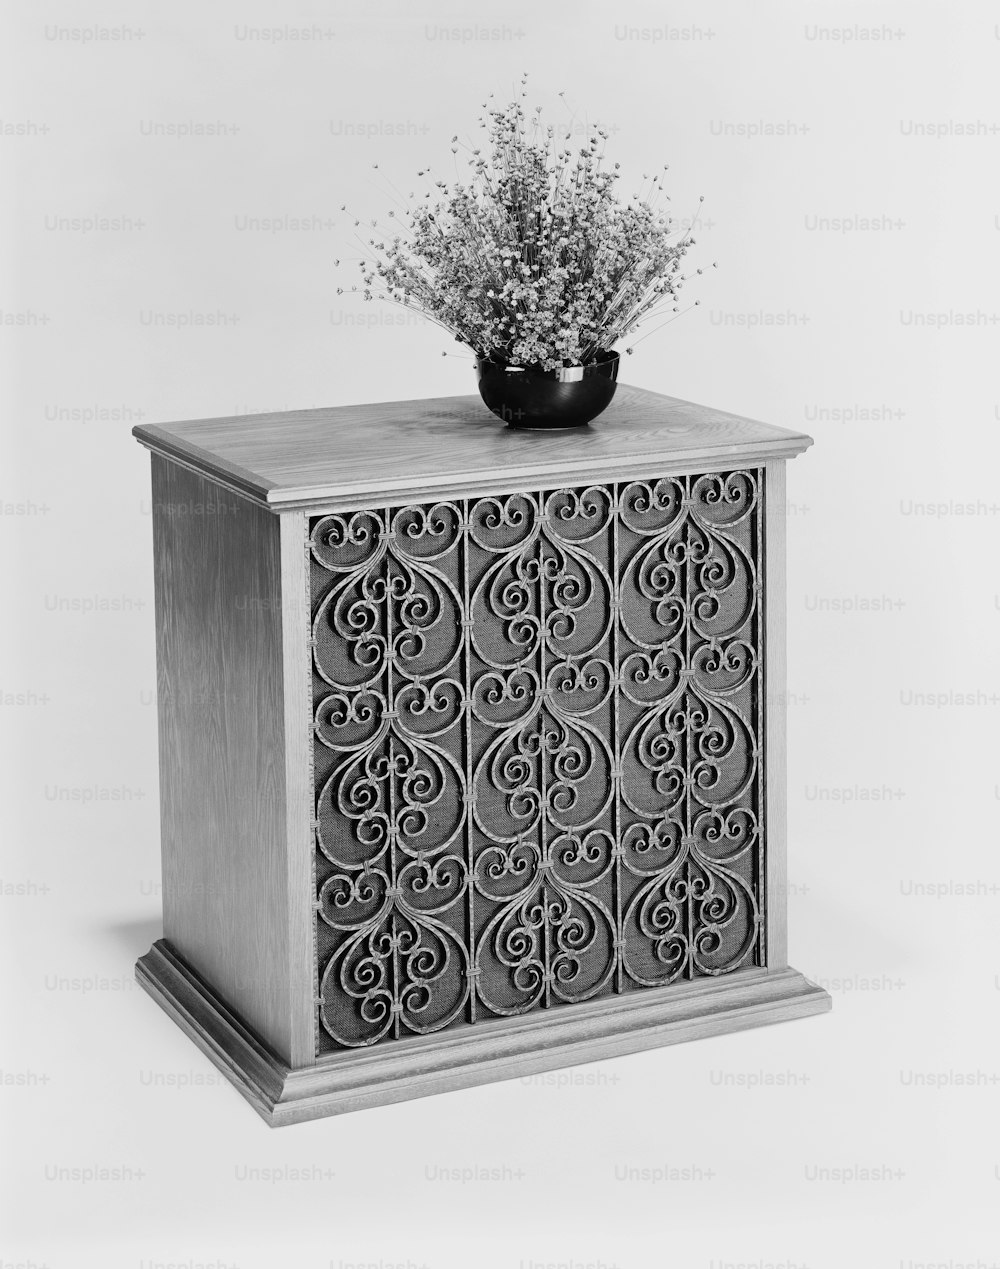 a black and white photo of a vase with flowers